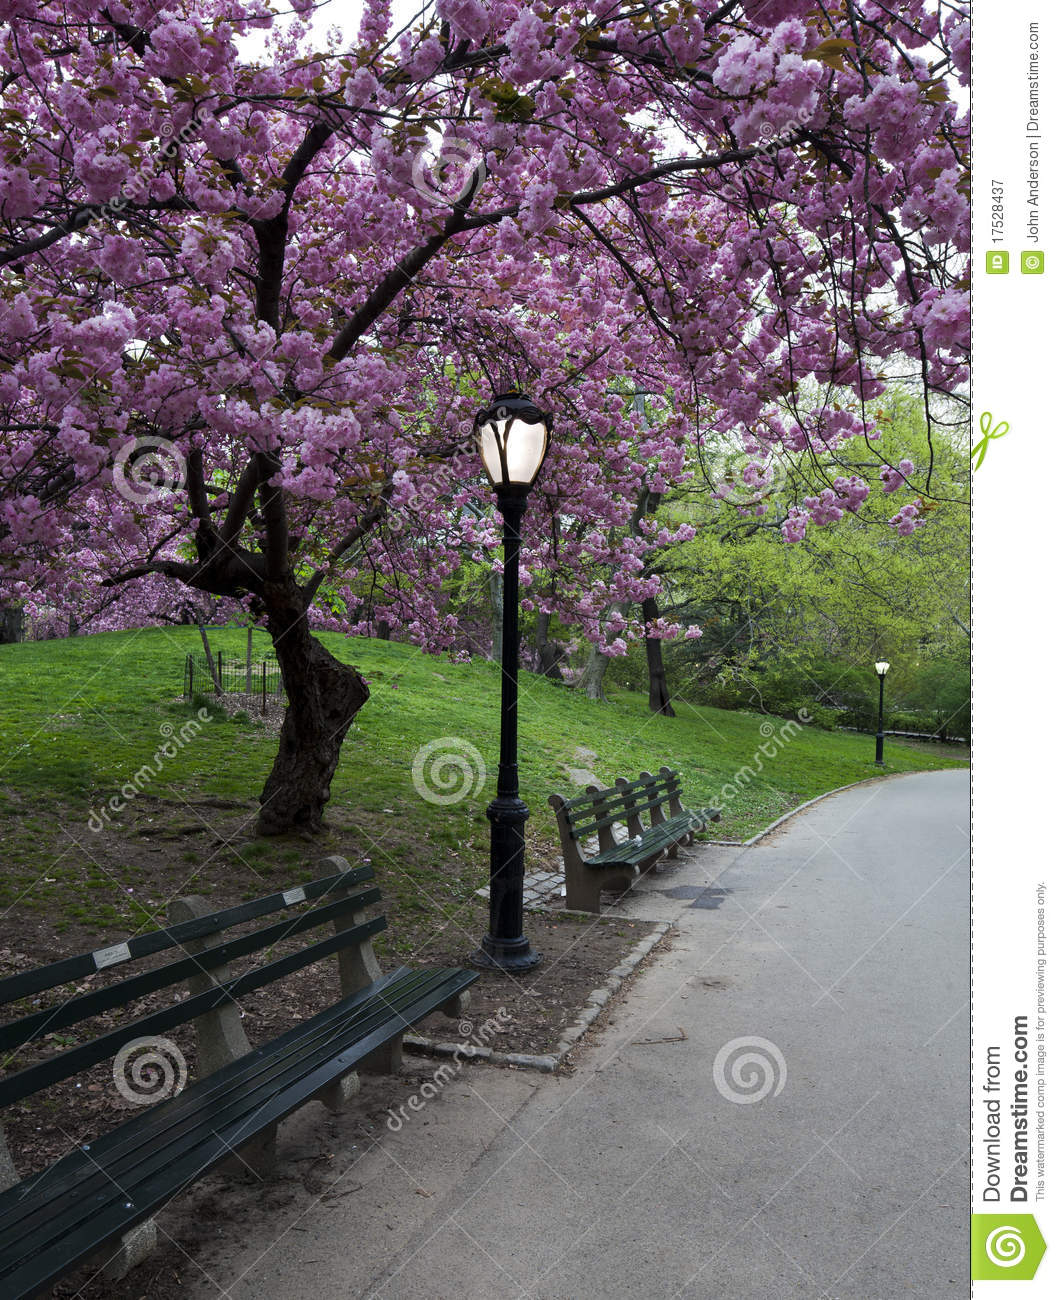 More Similar Stock Images Of   Sidewalk In The Park  